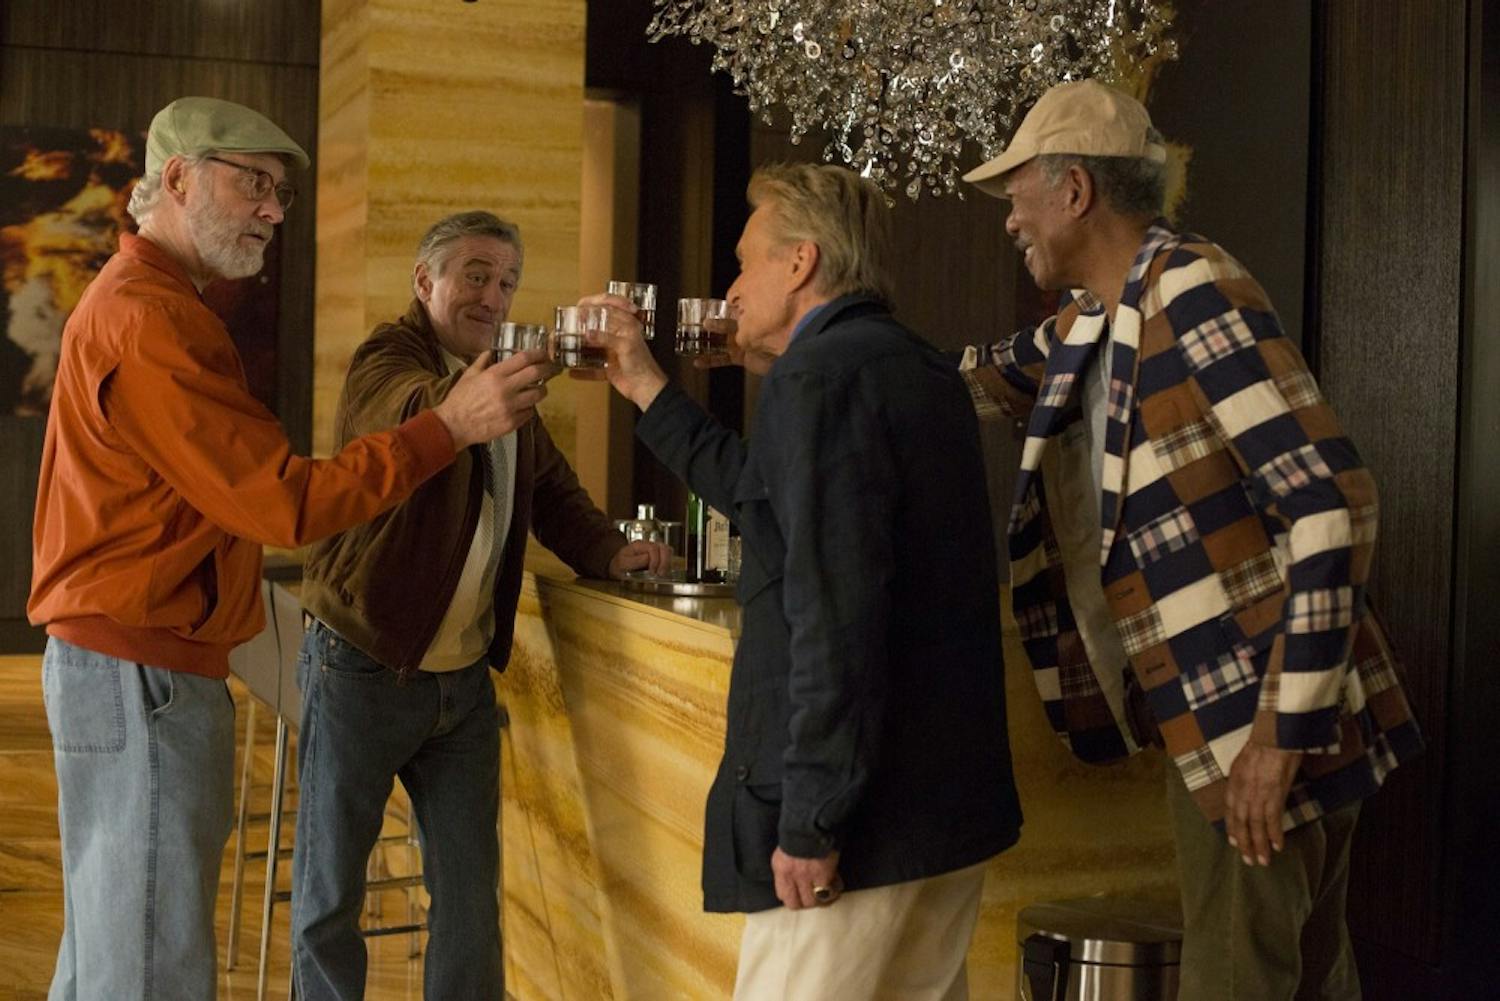 From left, Kevin Kline (as Sam Harris), Robert De Niro (as Paddy Connors), Michael Douglas (as Billy Gherson), and Morgan Freeman (as Archie Clayton) star in CBS Films' comedy "Last Vegas." (Chuck Zlotnick/CBS Films/MCT)